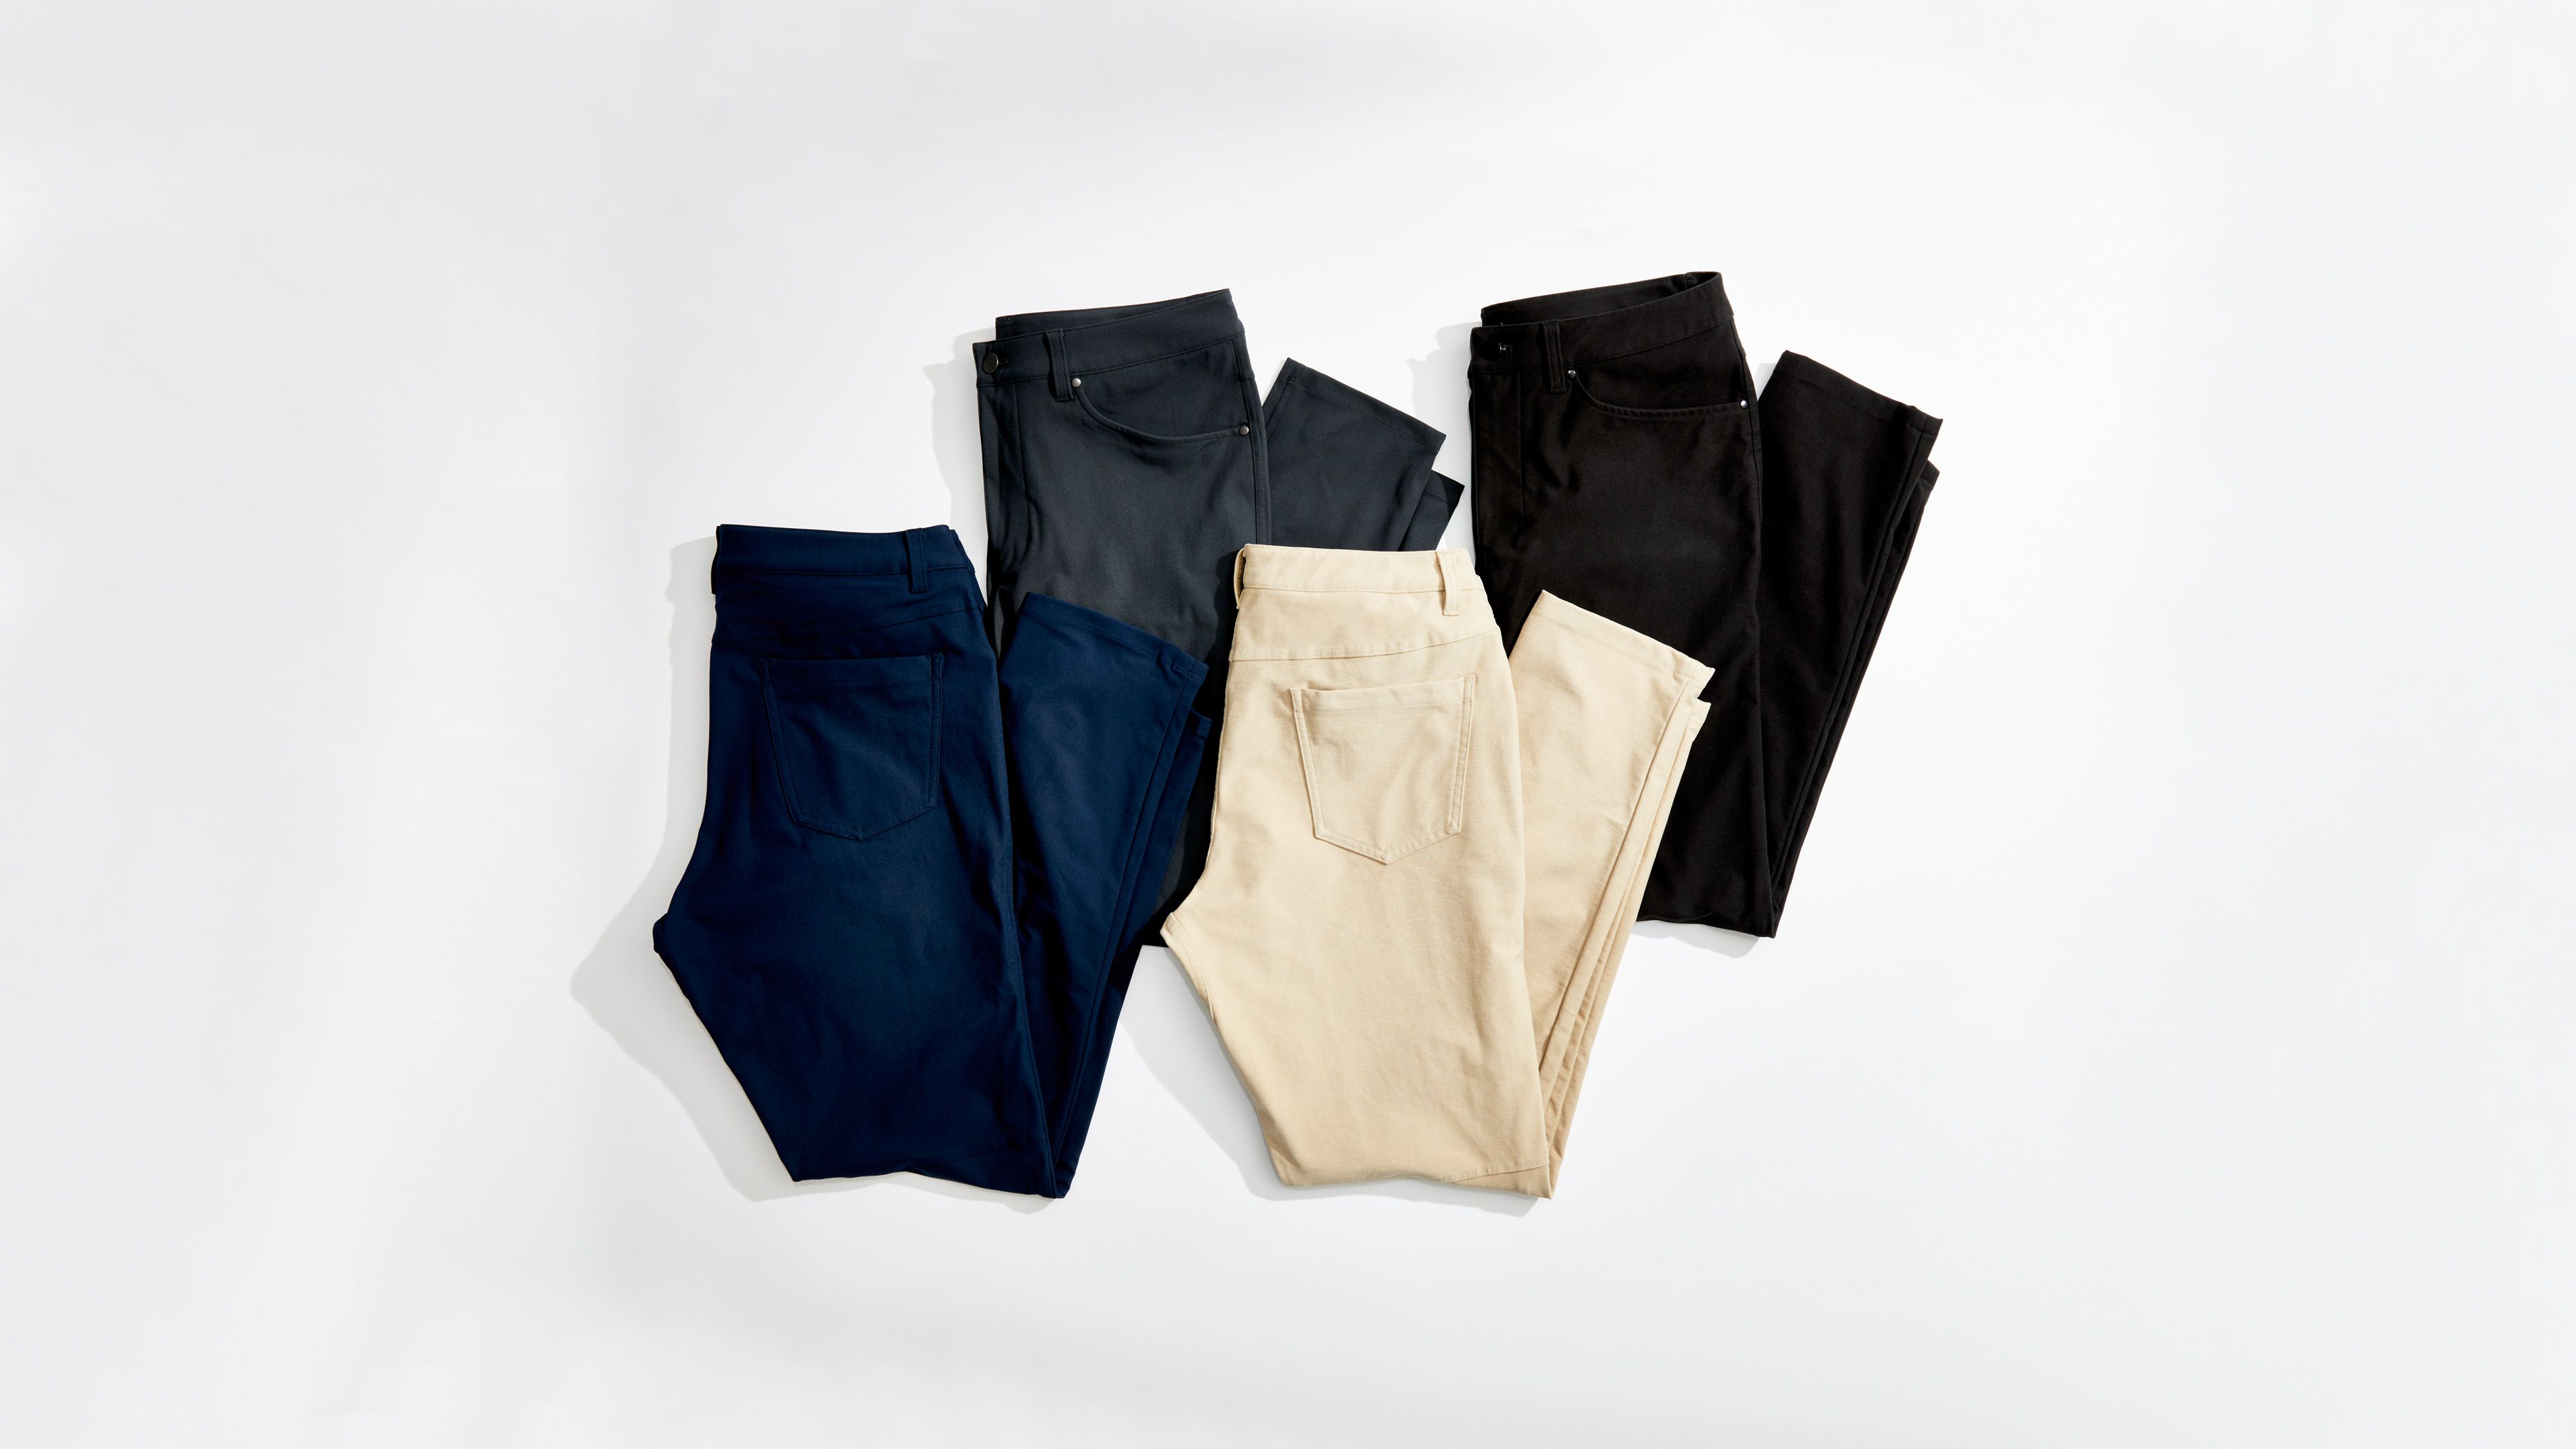 Lululemon ABC Pants Review, Price, and Where to Buy